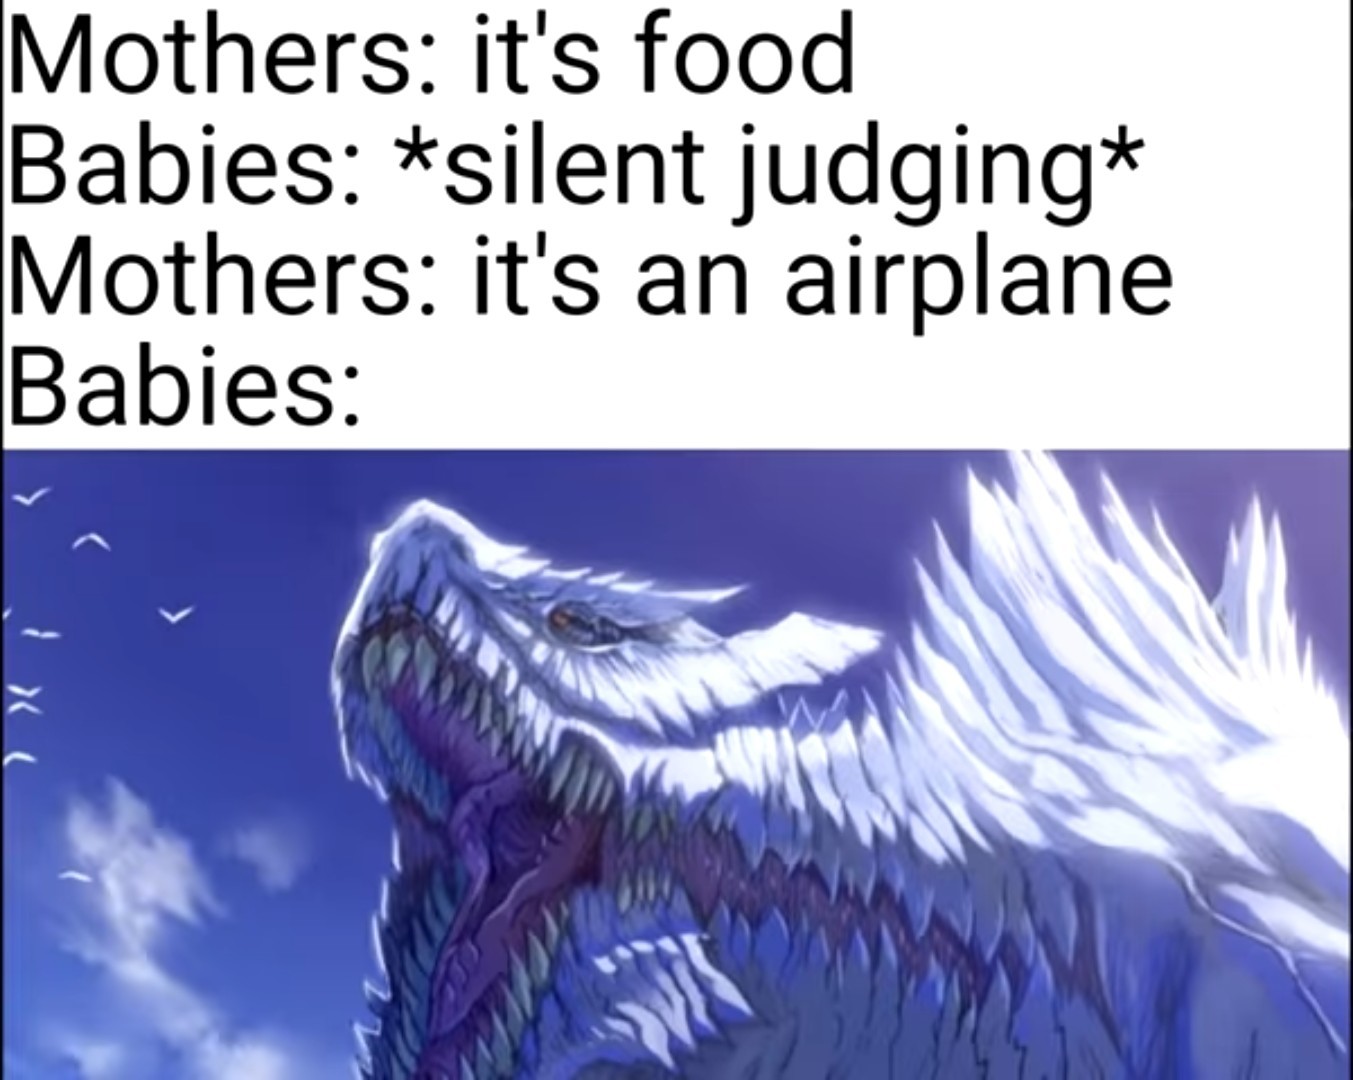 Cause planes just fly in ur mouth all the time - meme